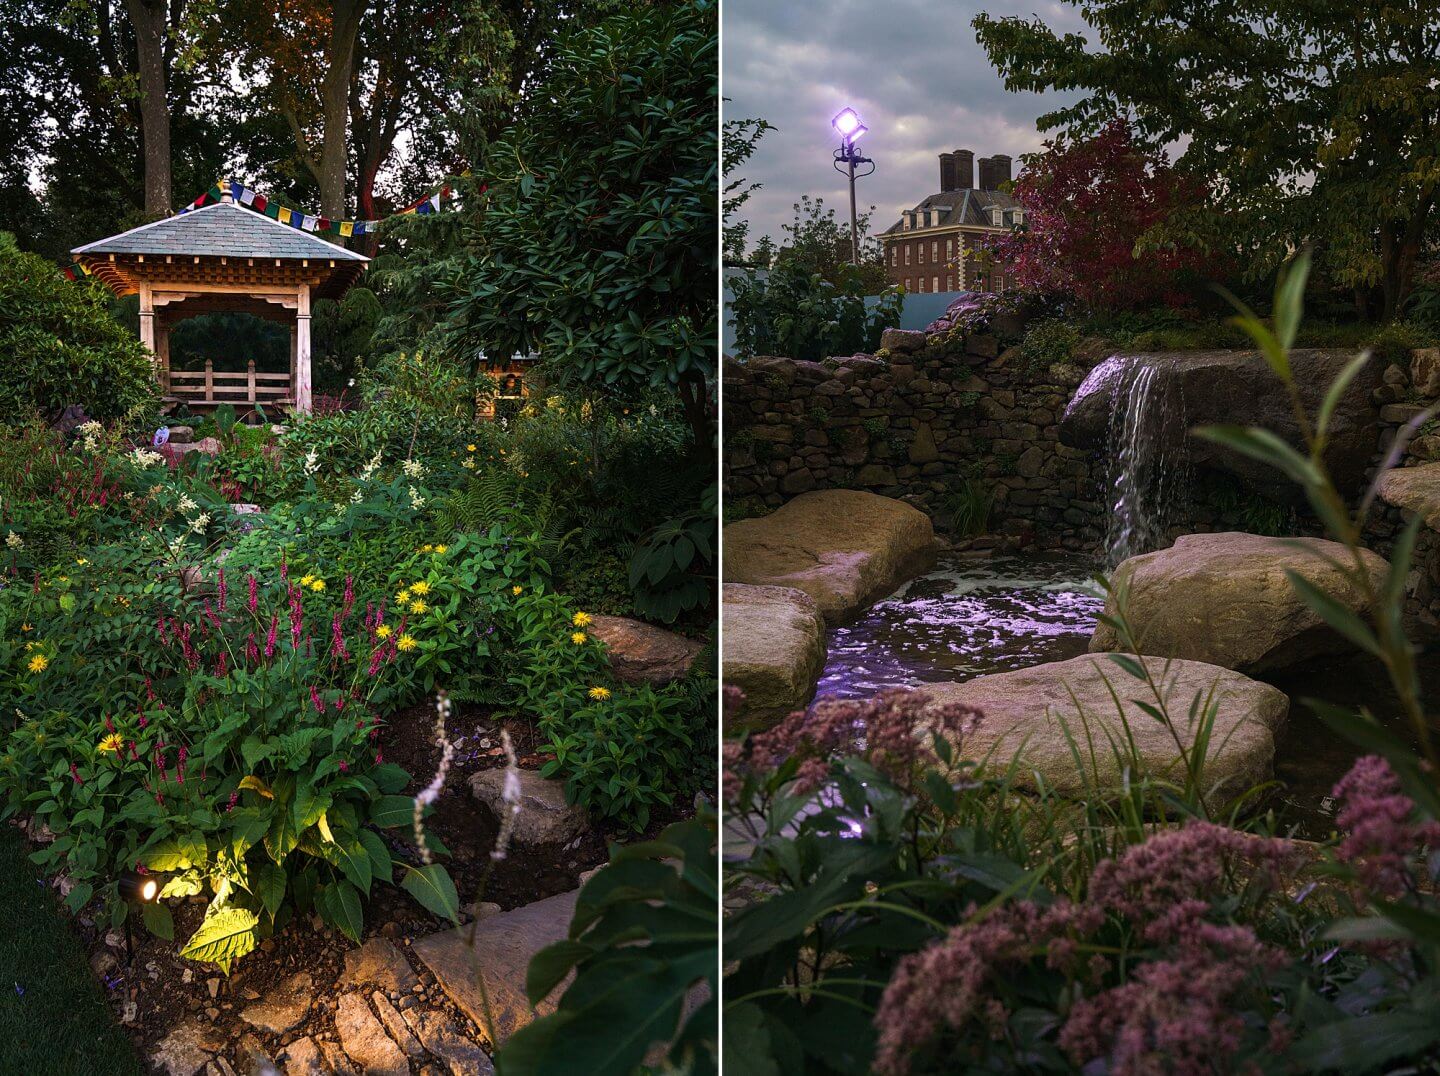 trailfinders garden inspired by Nepal, and Psalm 23 Garden by Sarah Eberle, after dark at RHS Chelsea